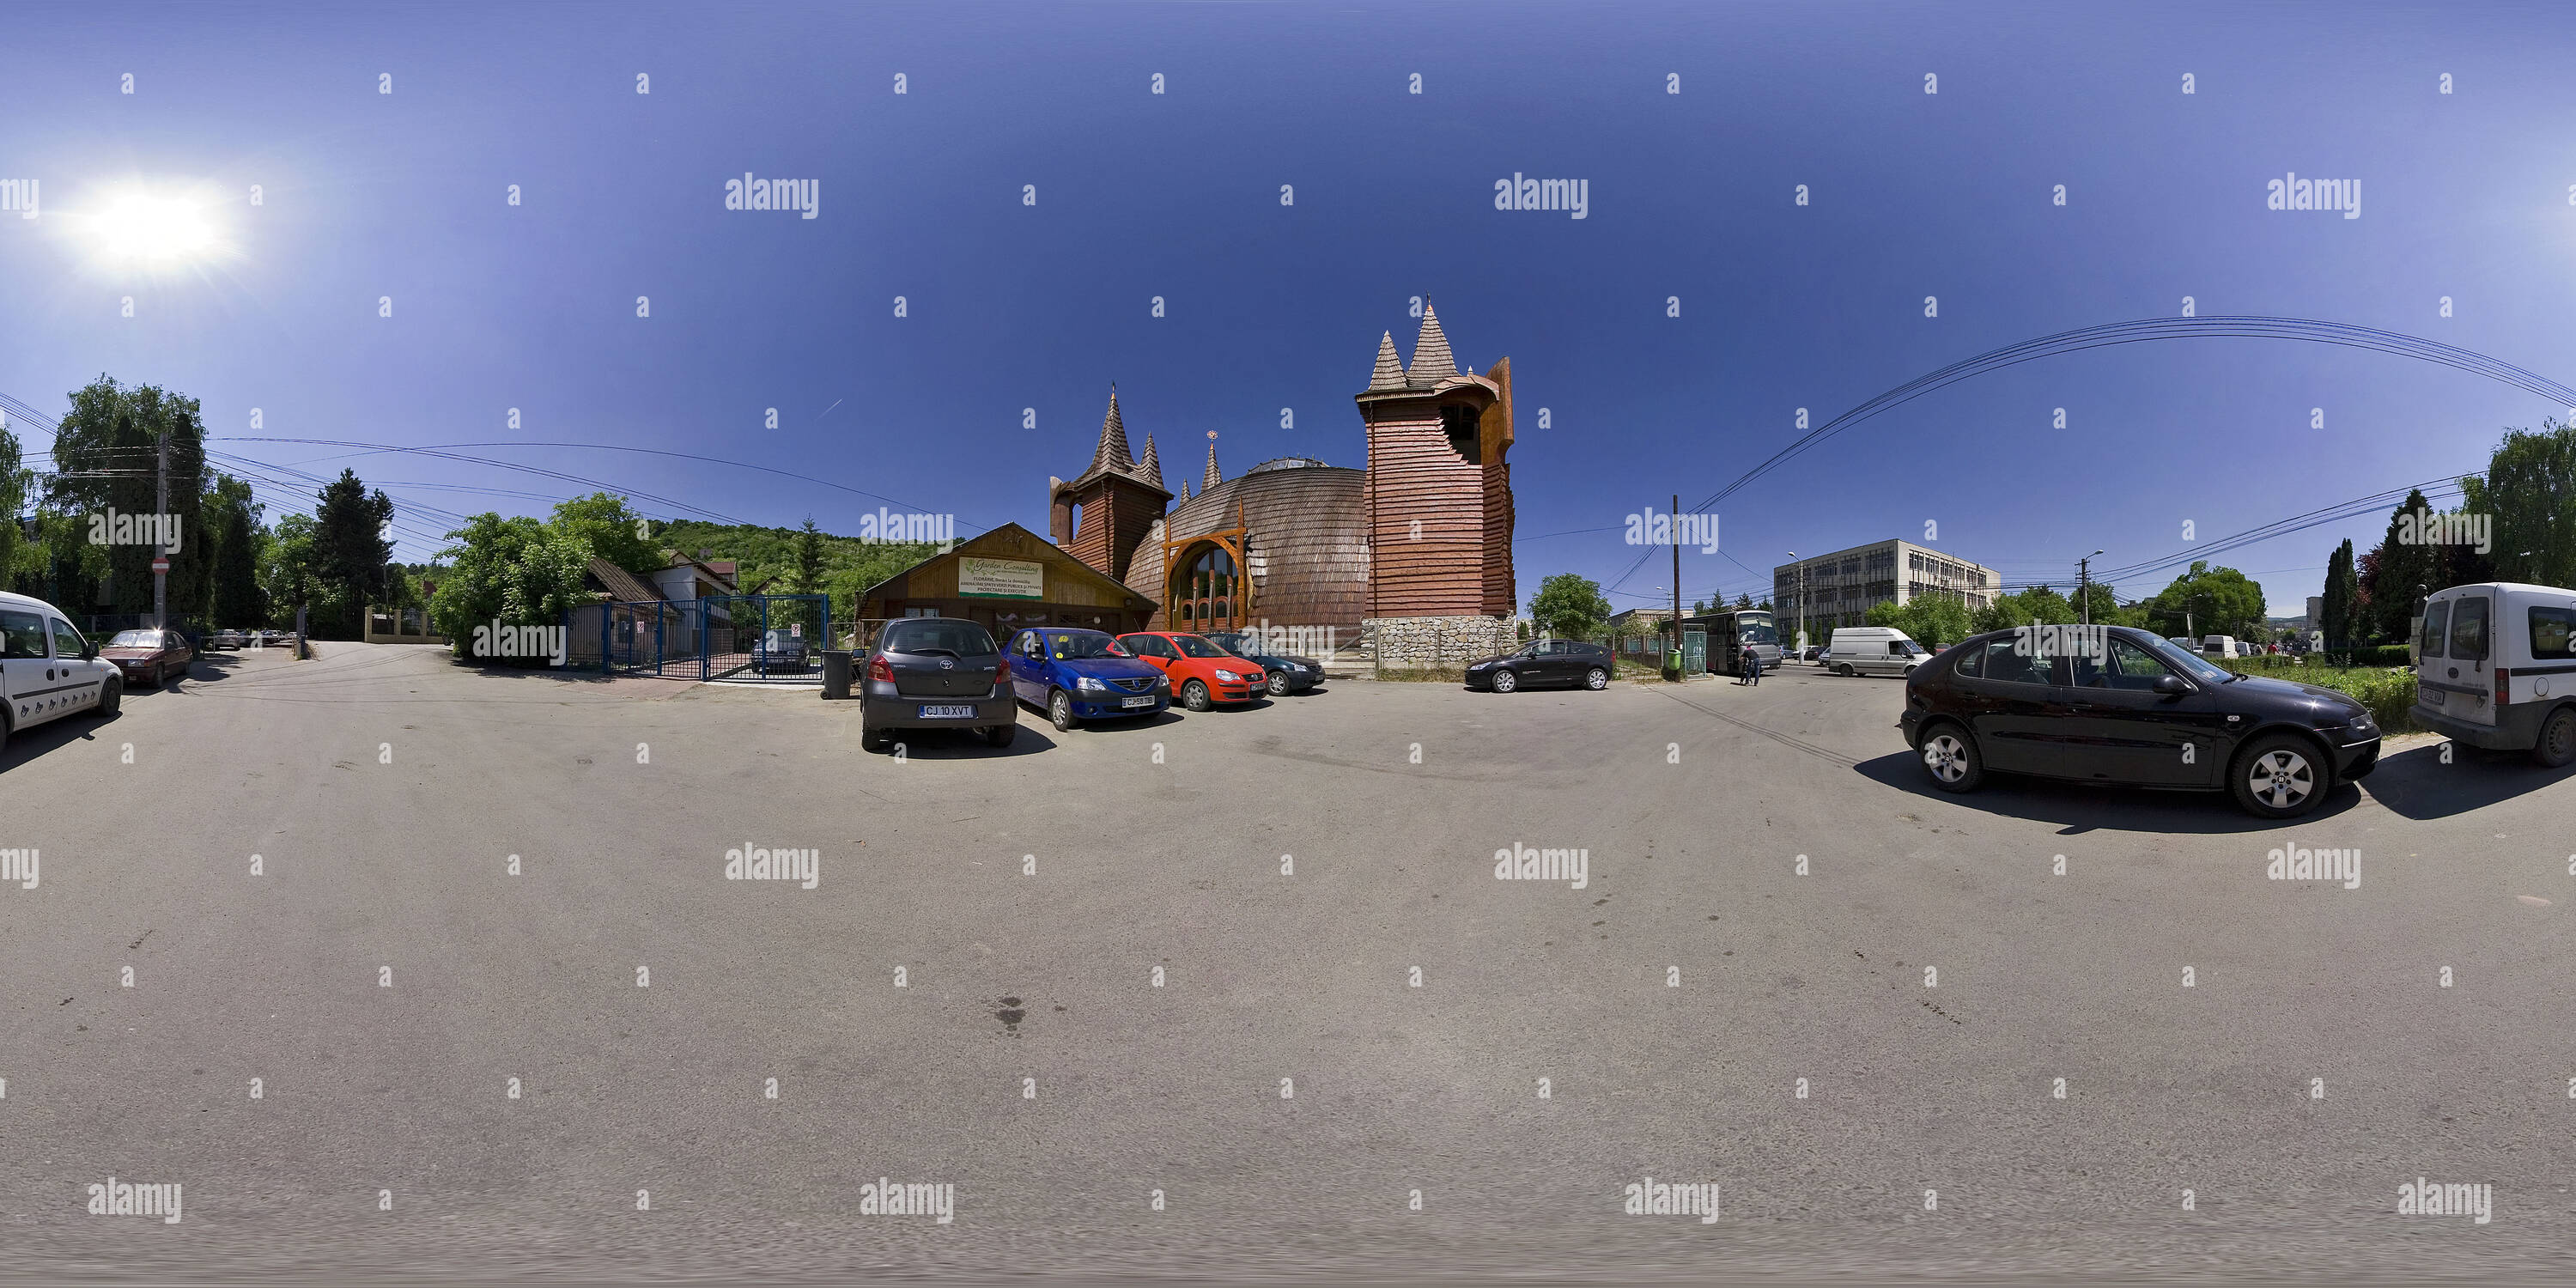 360 degree panoramic view of Reformed church - planning Imre Makovecz